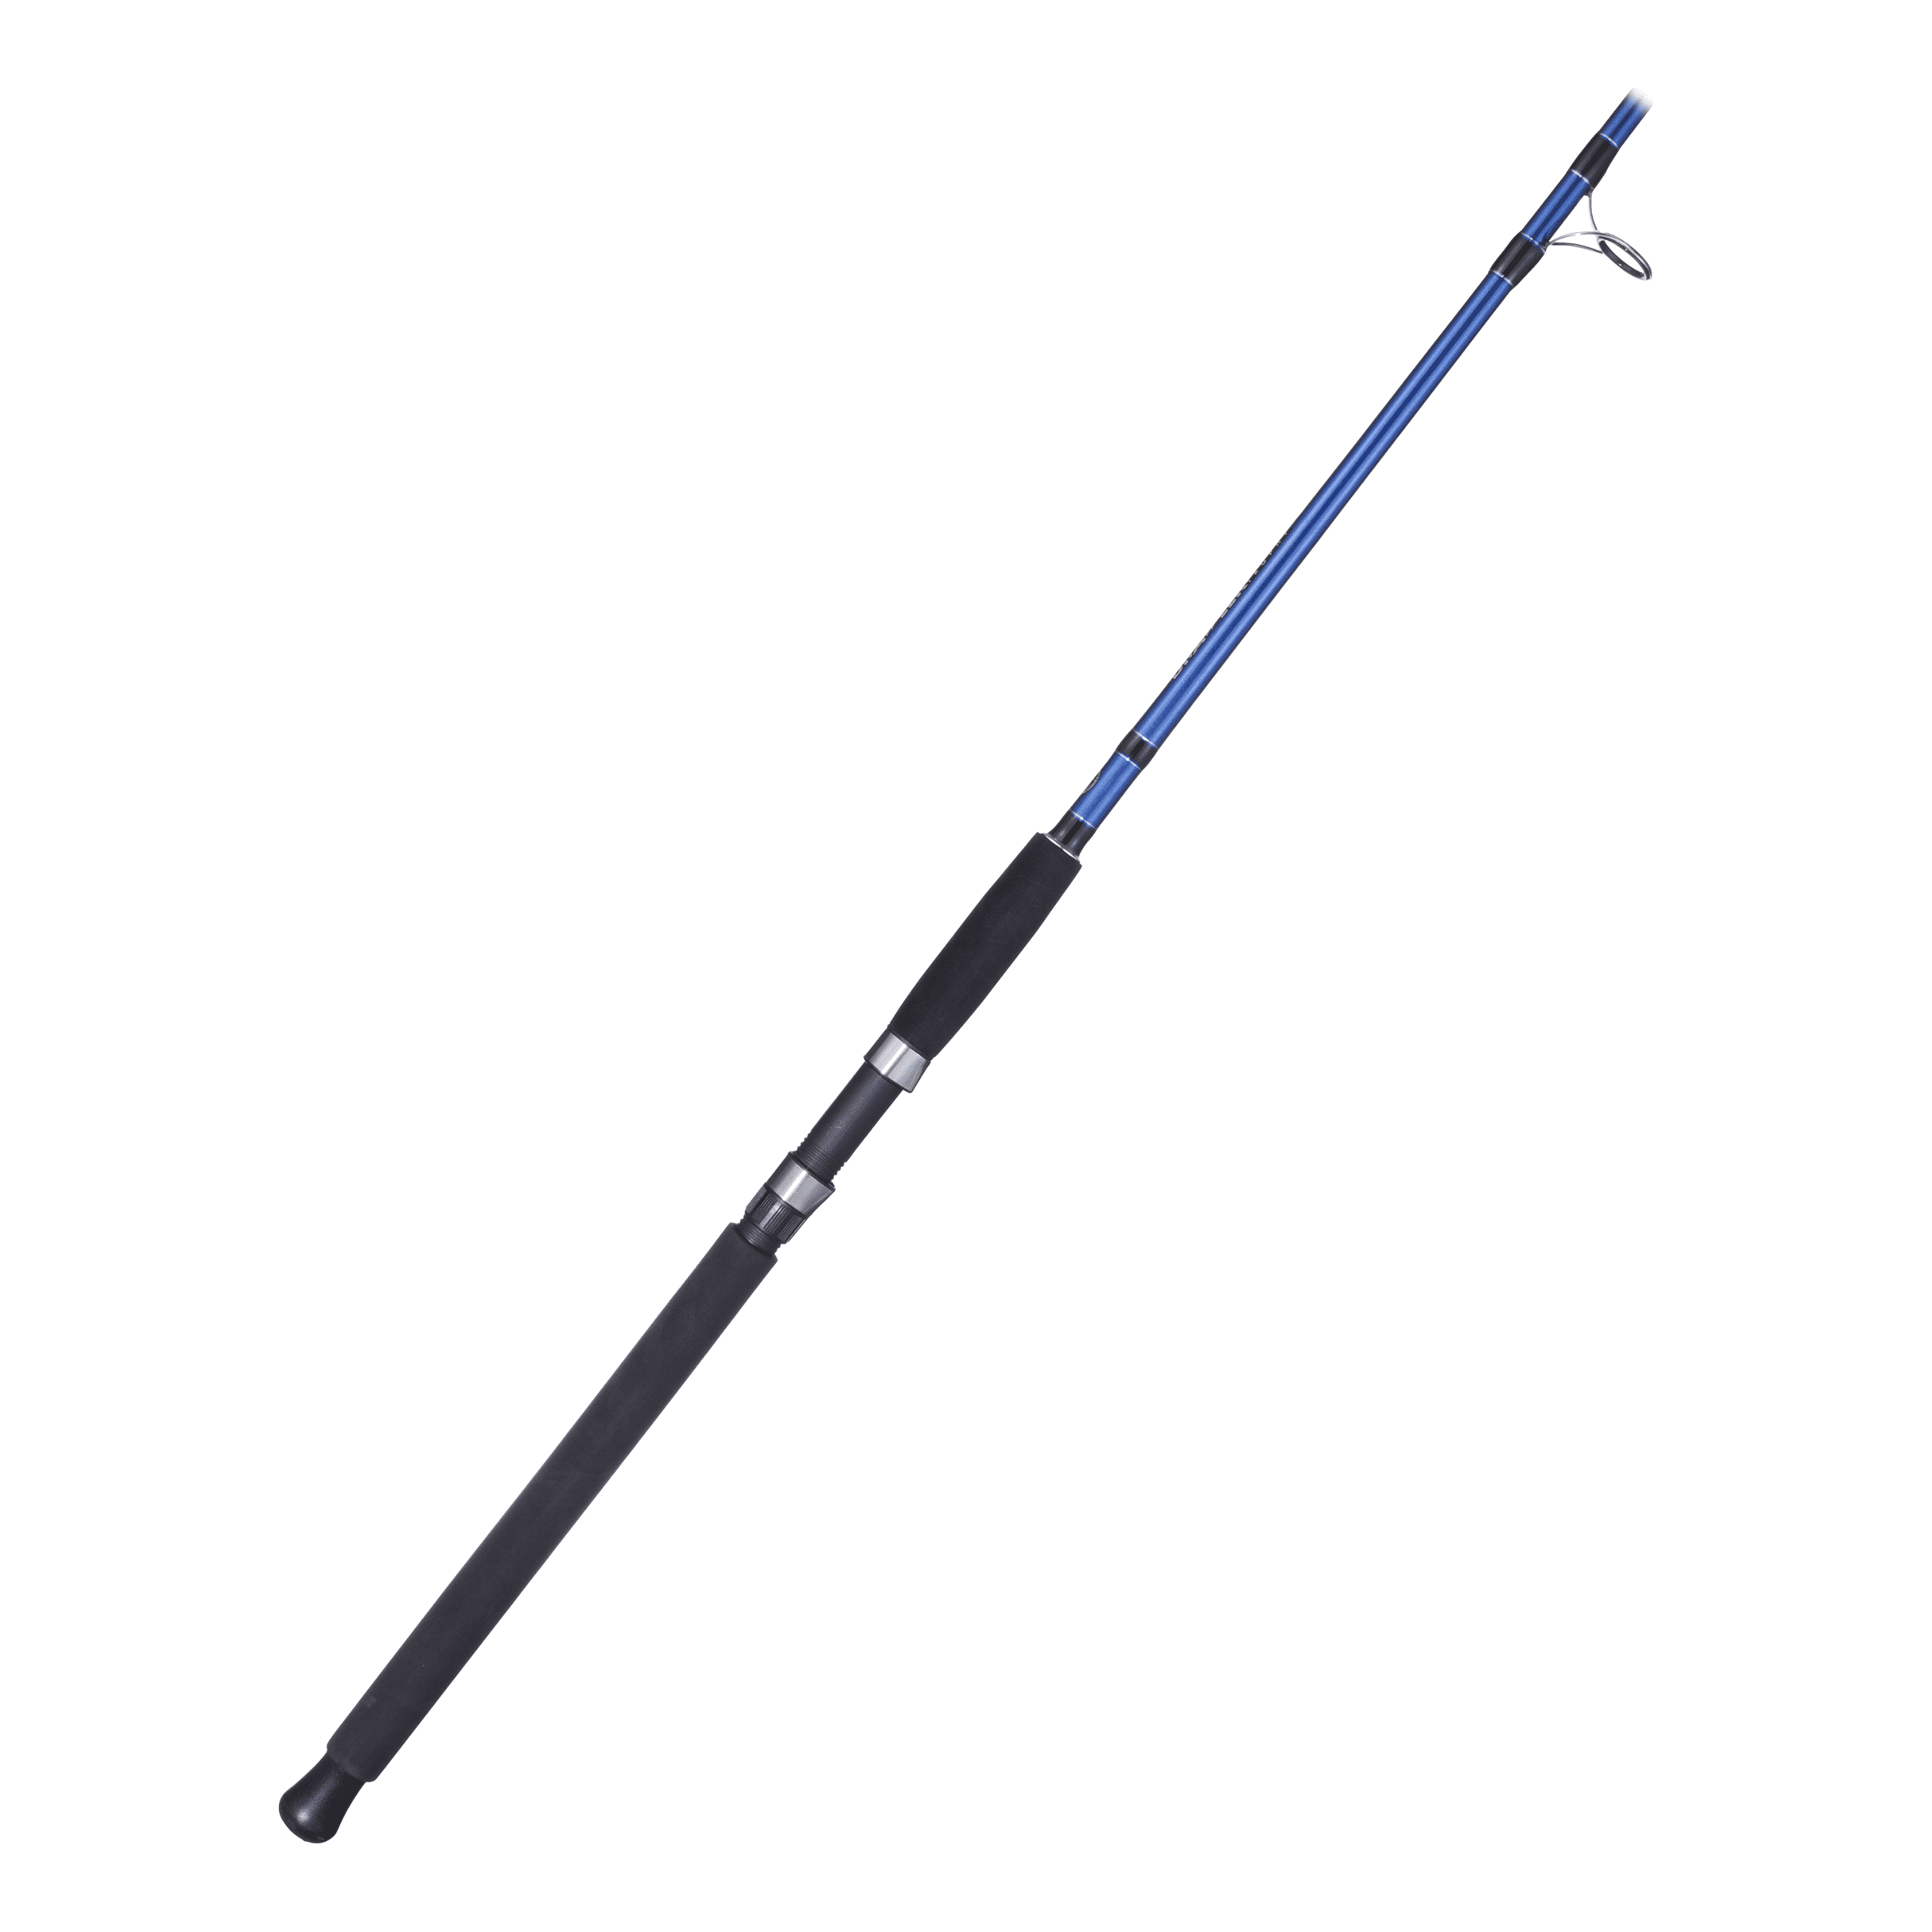 Offshore Angler Tightline Spinning Rod and Reel Combo - Model